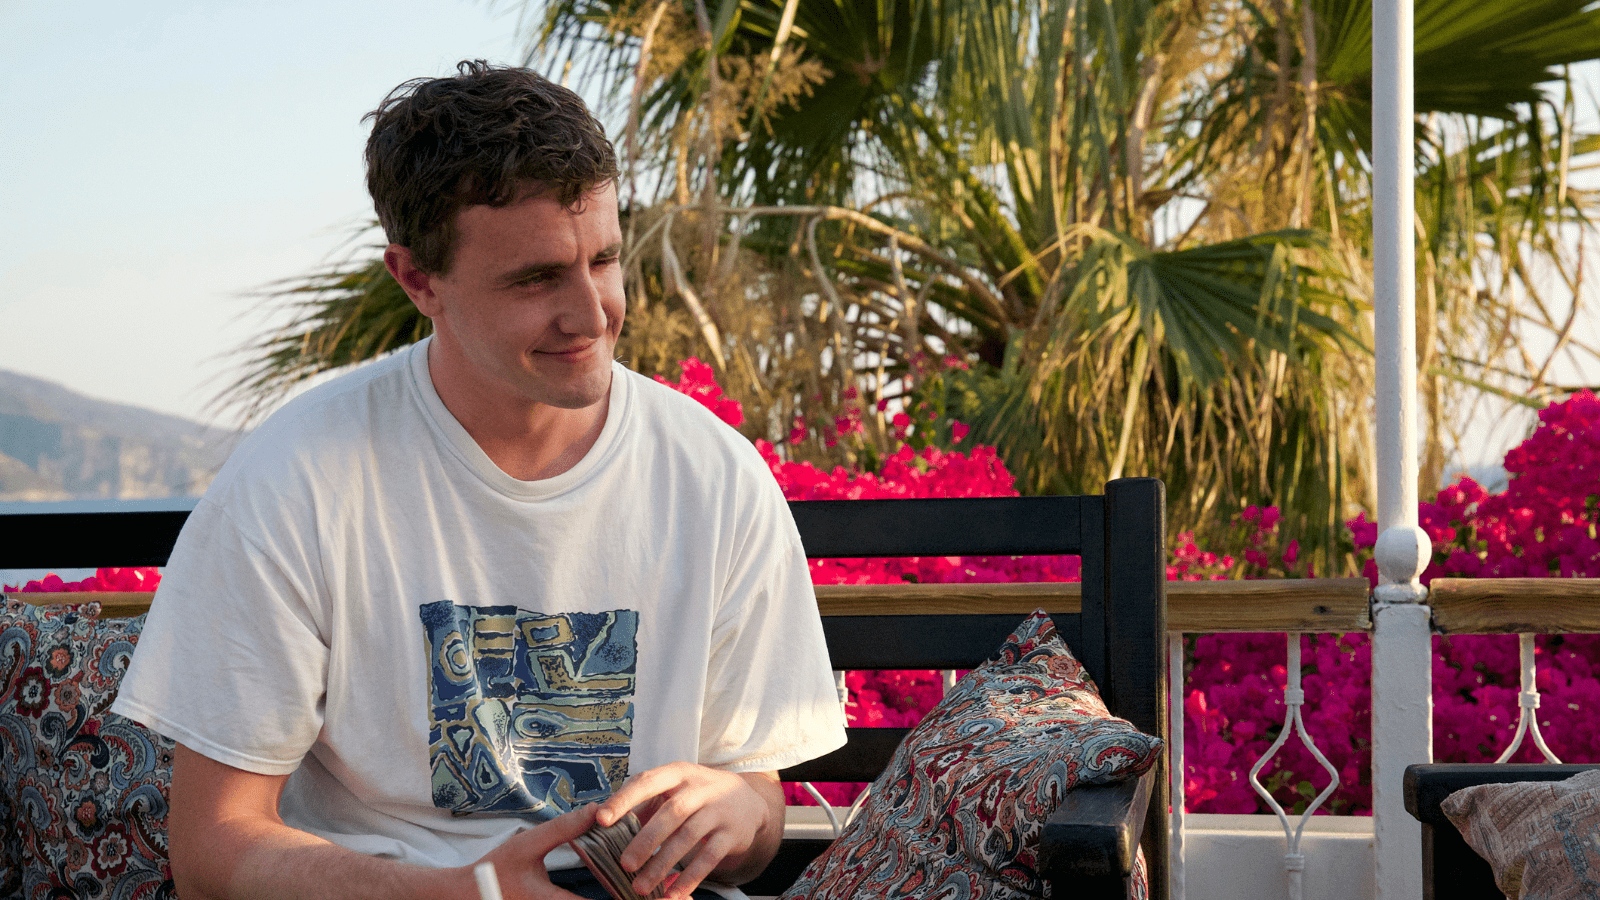 Aftersun still. Paul Mescal character smiles while sitting down outside. Pink blossoms can be seen behind him